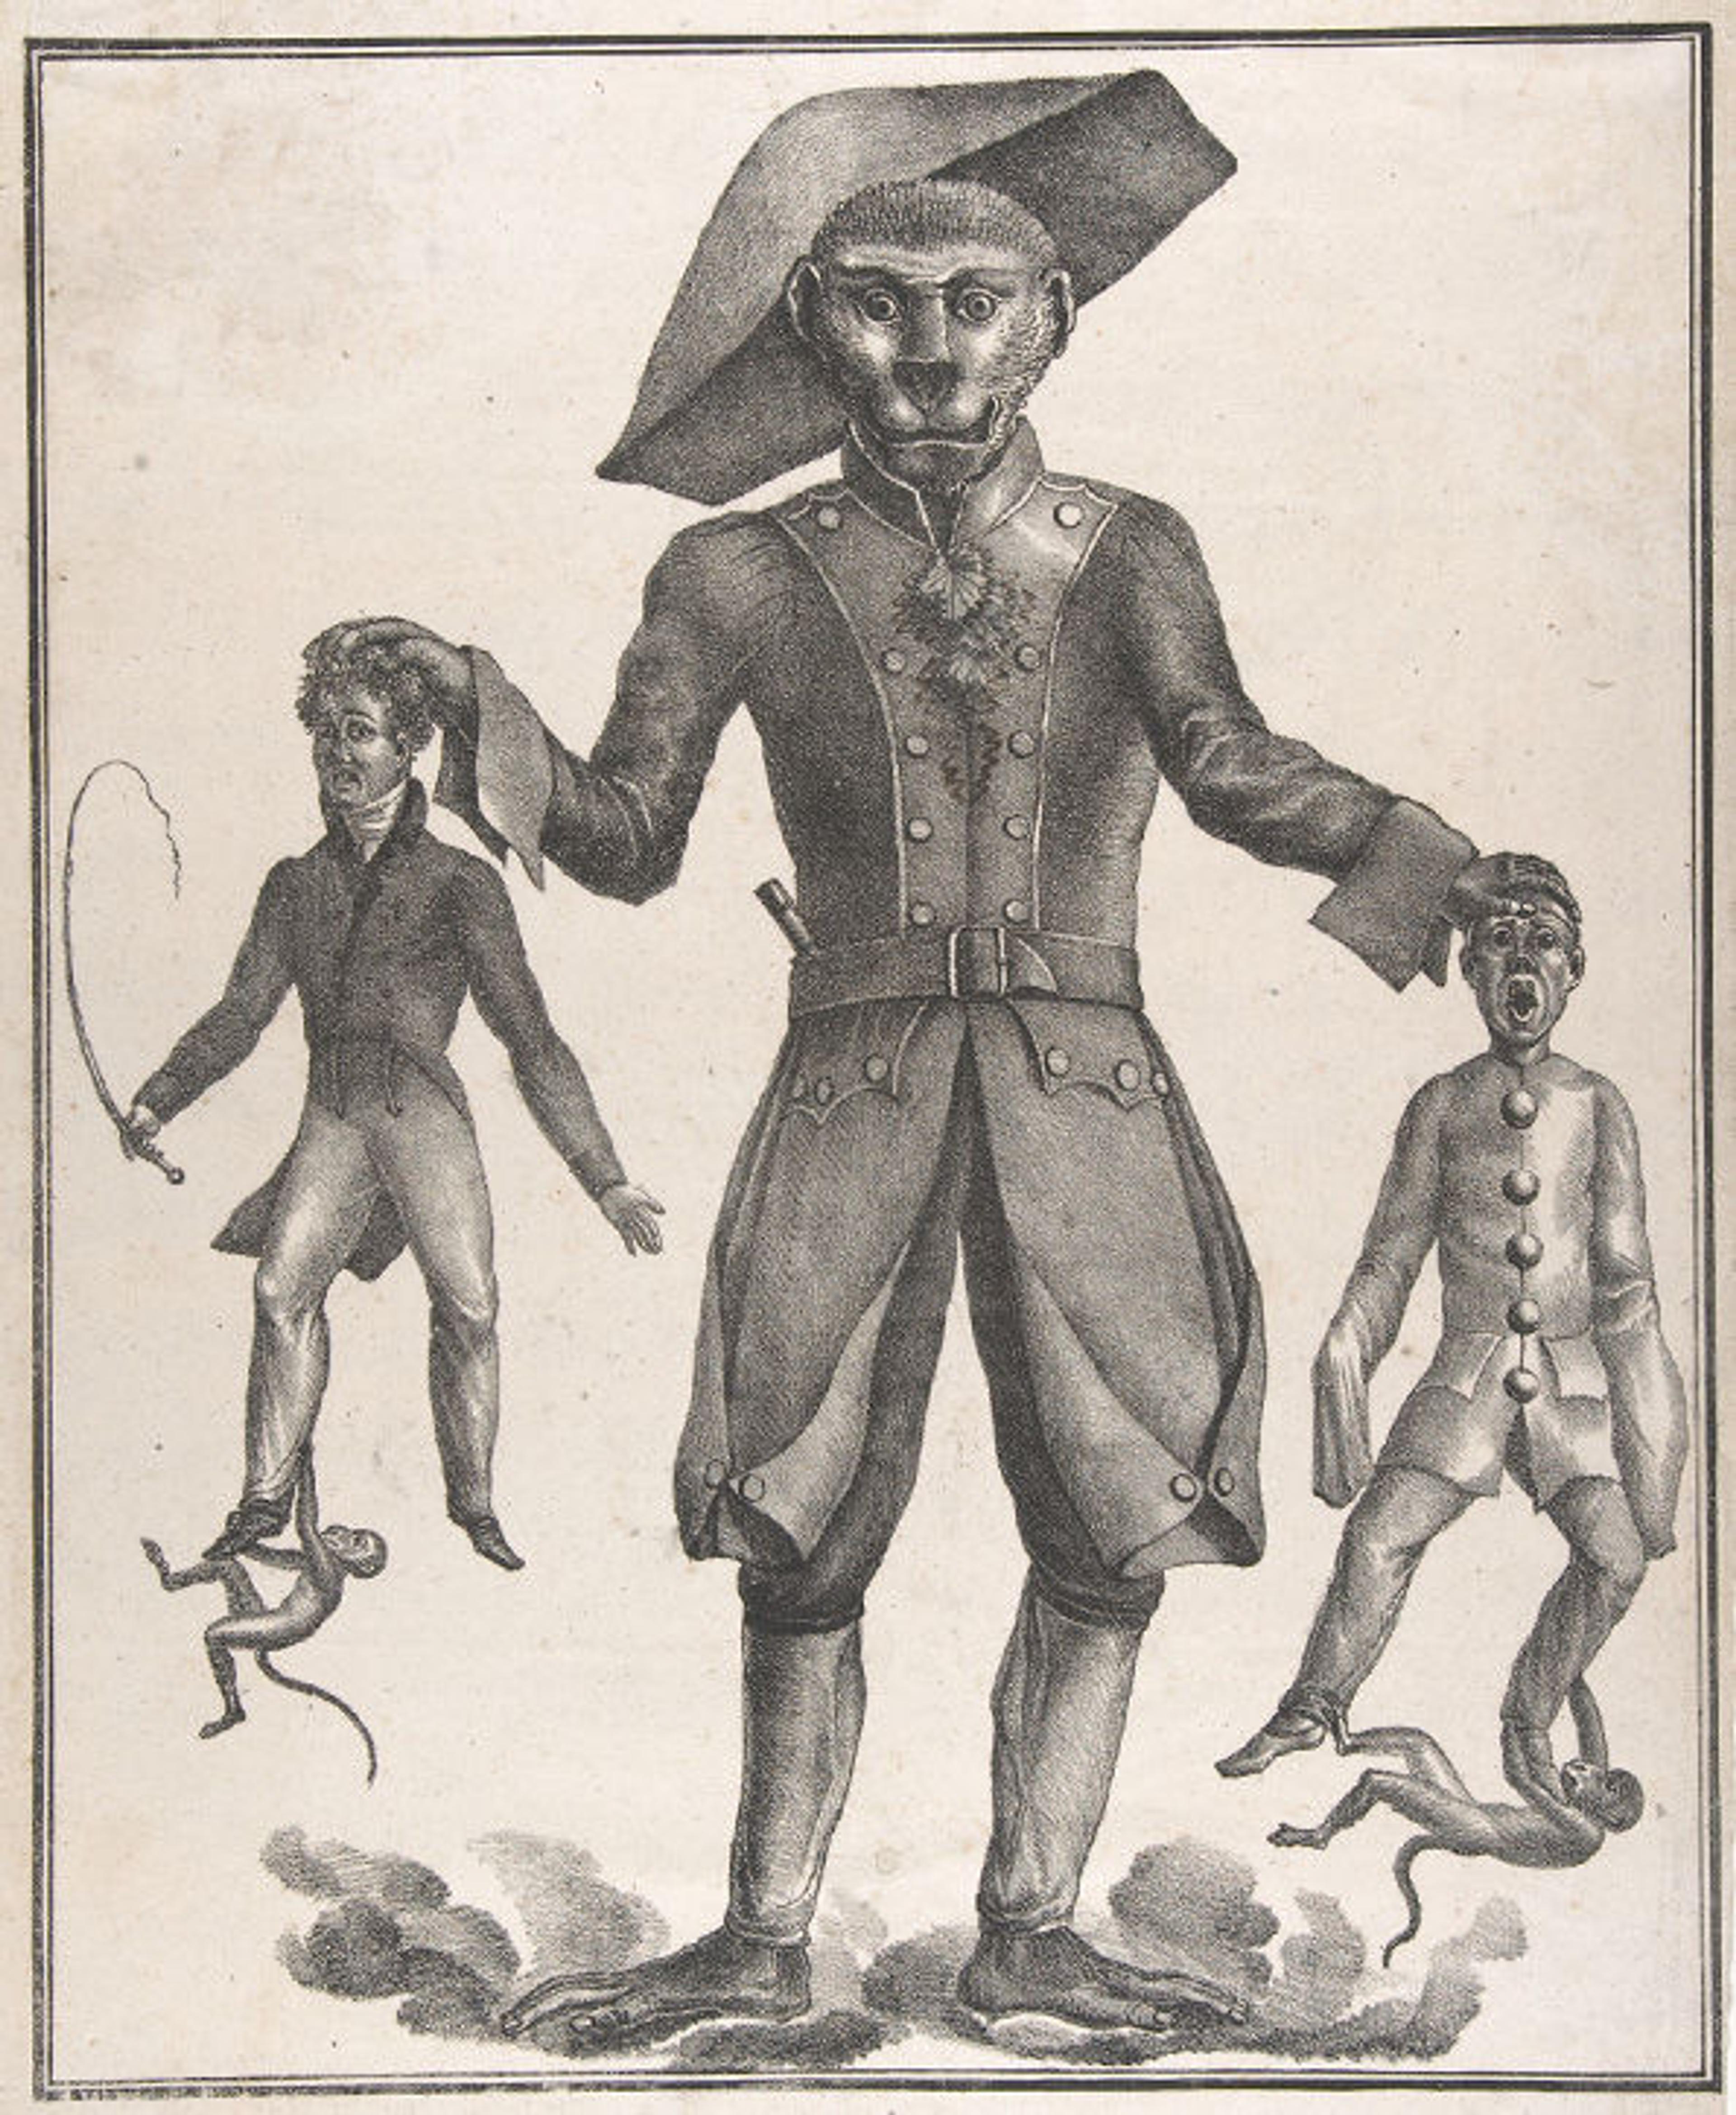 A Giant Monkey in Uniform Holding up Pierrot and a Man with a Whip | after 1825 | 1990.1064.1